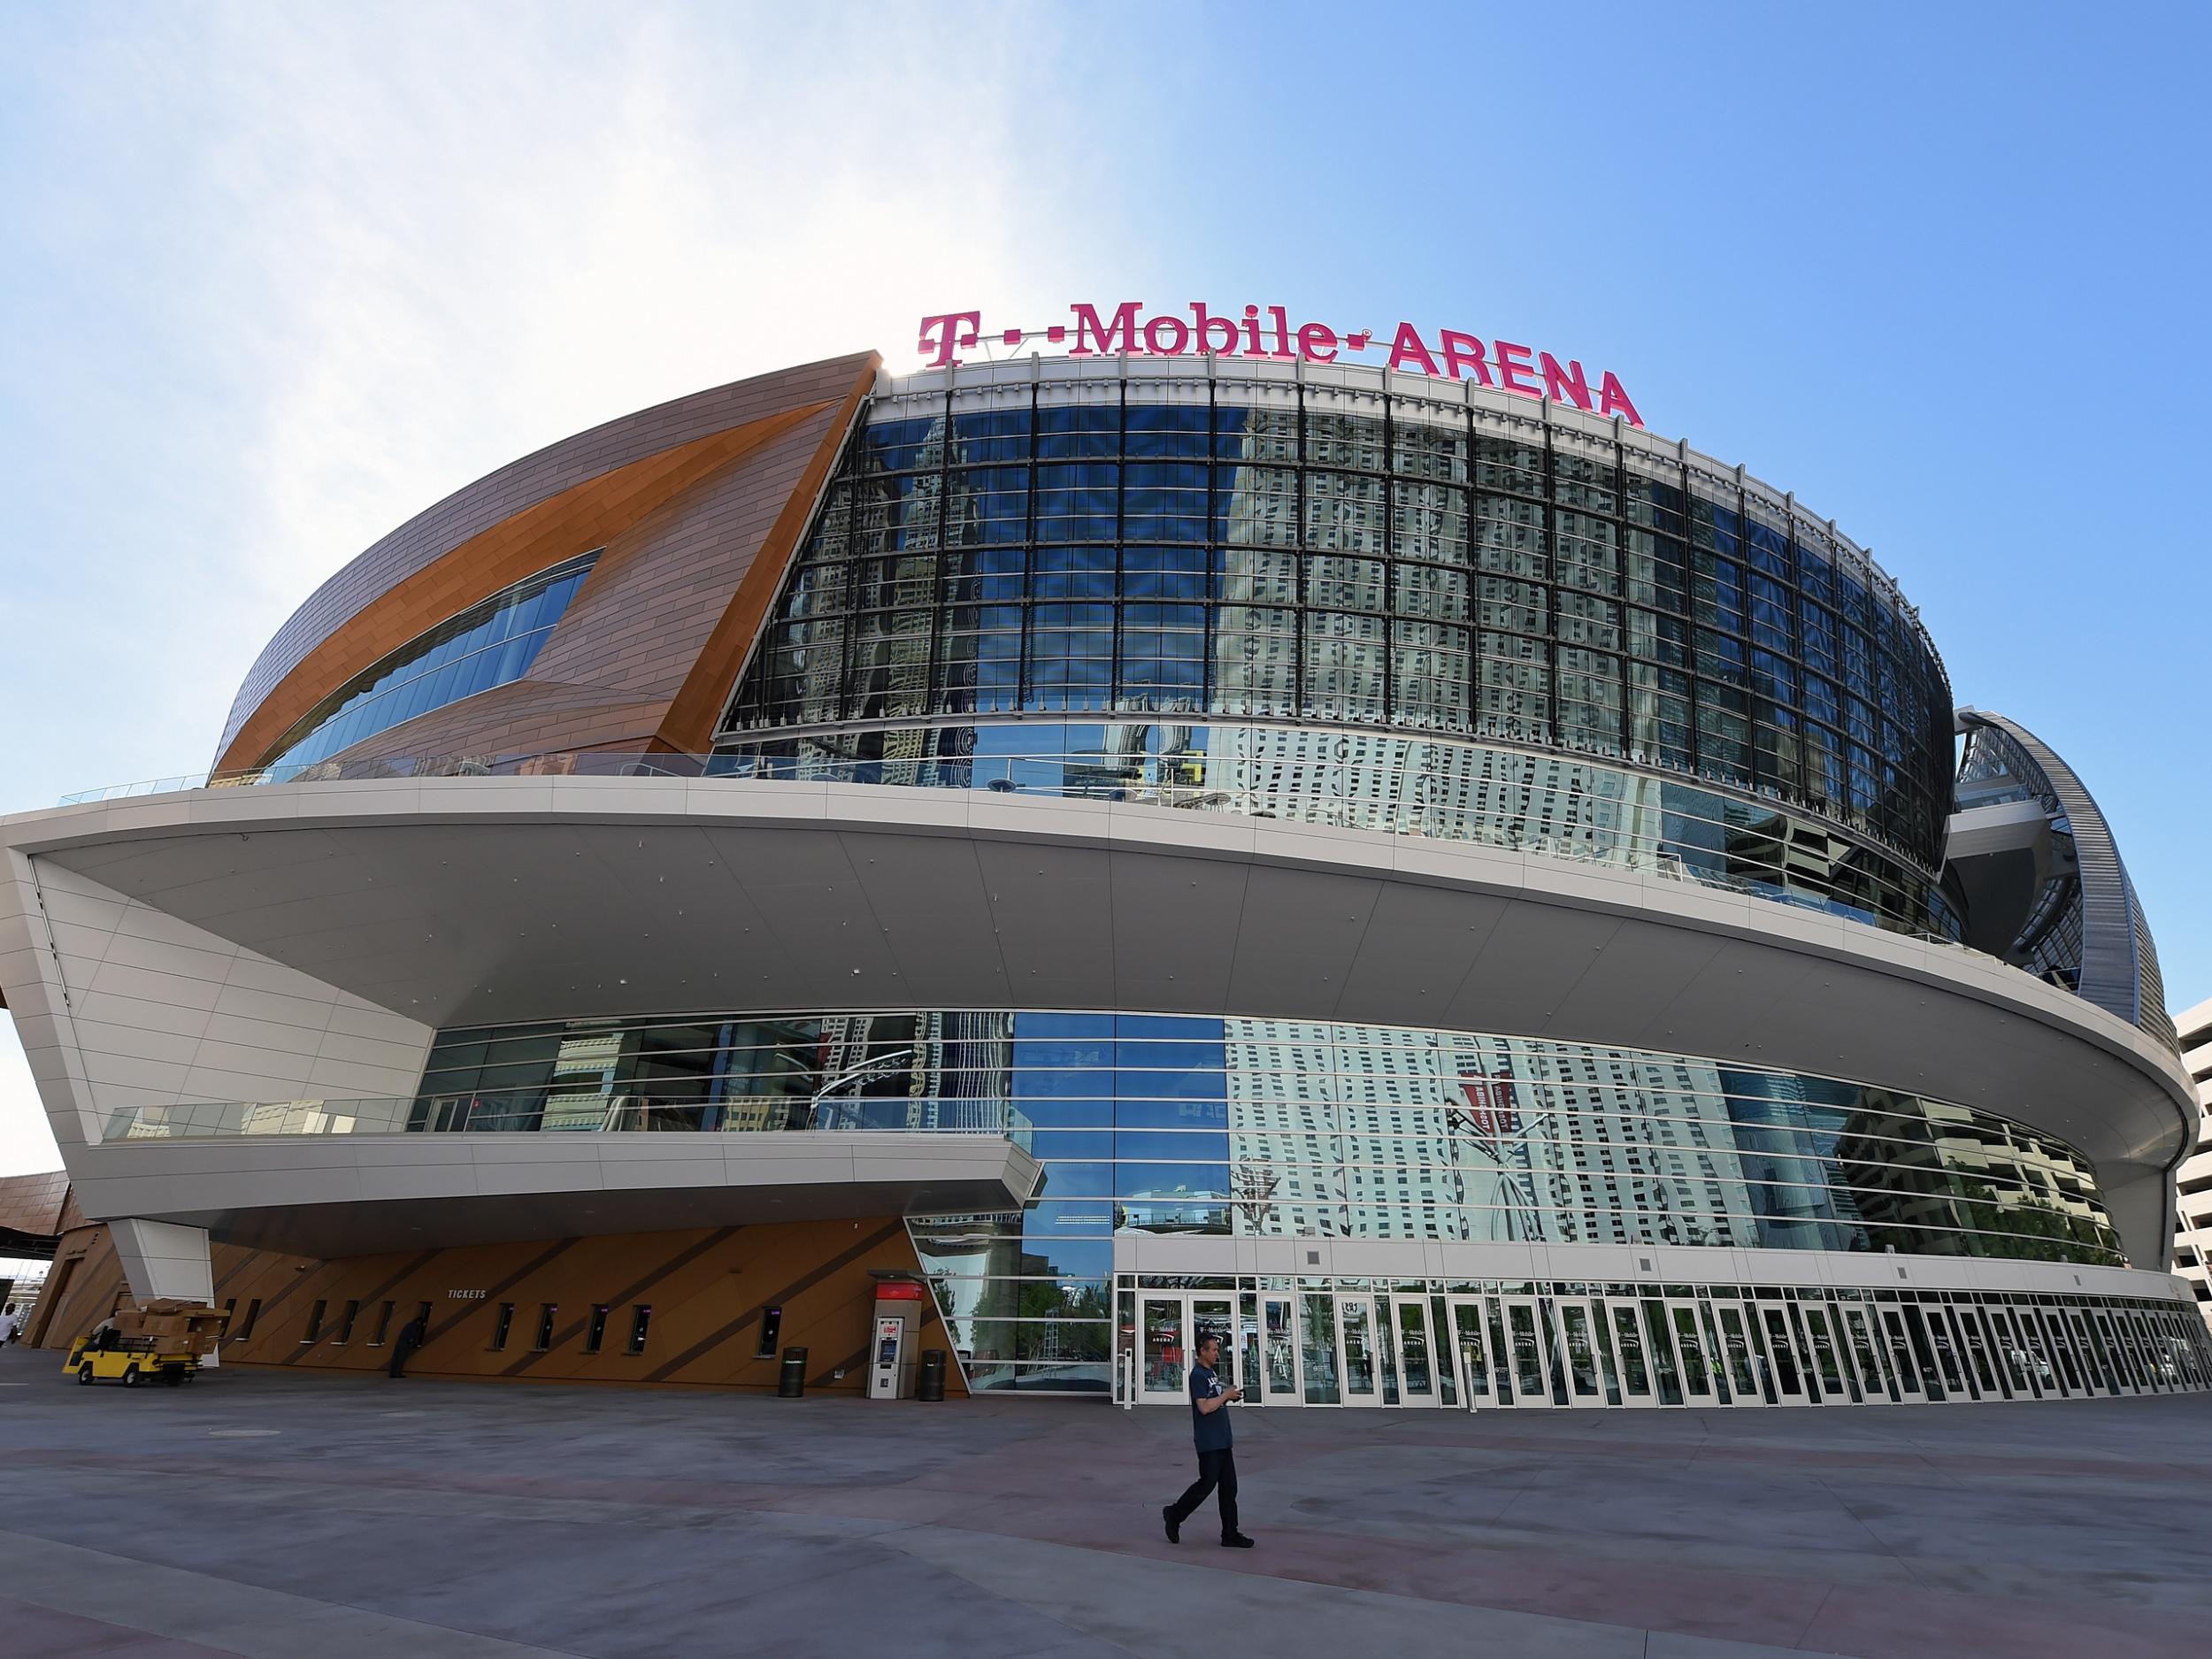 The T-Mobile Arena in Las Vegas will stage the contest